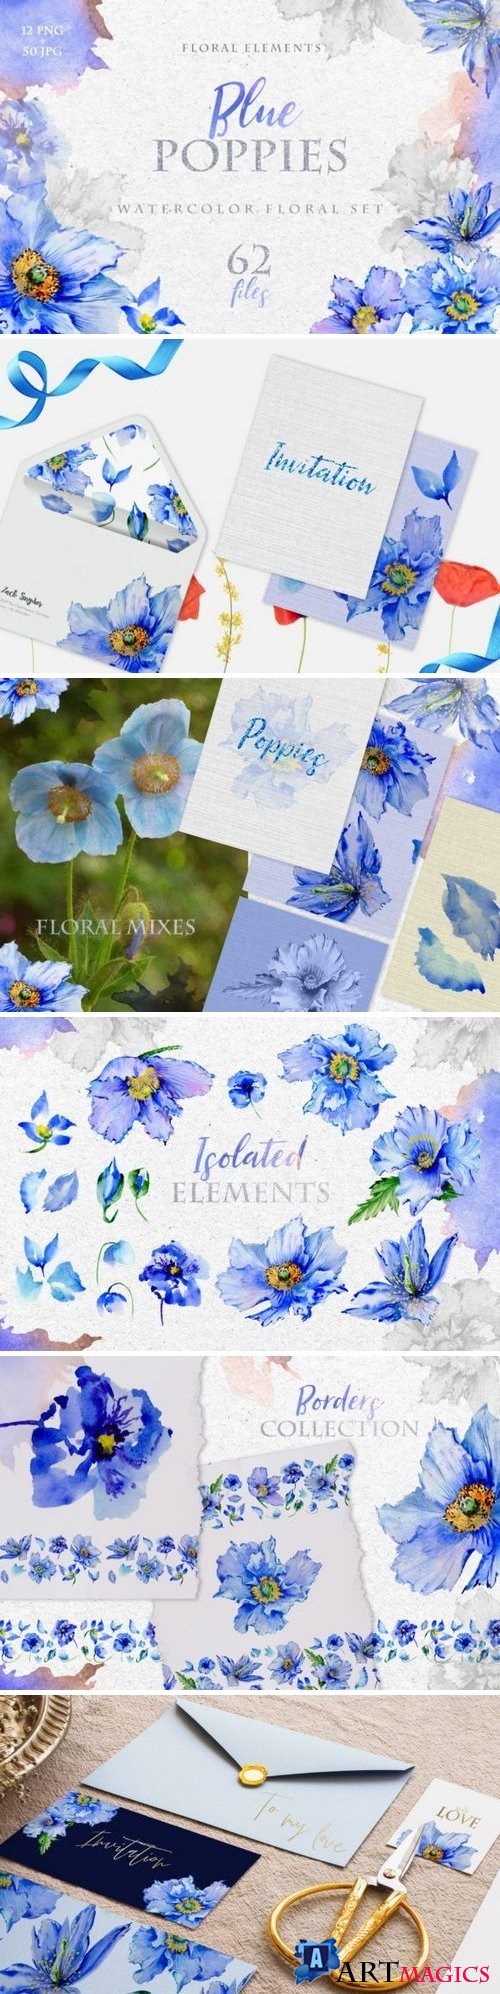 Blue Poppies Watercolor png 3319870